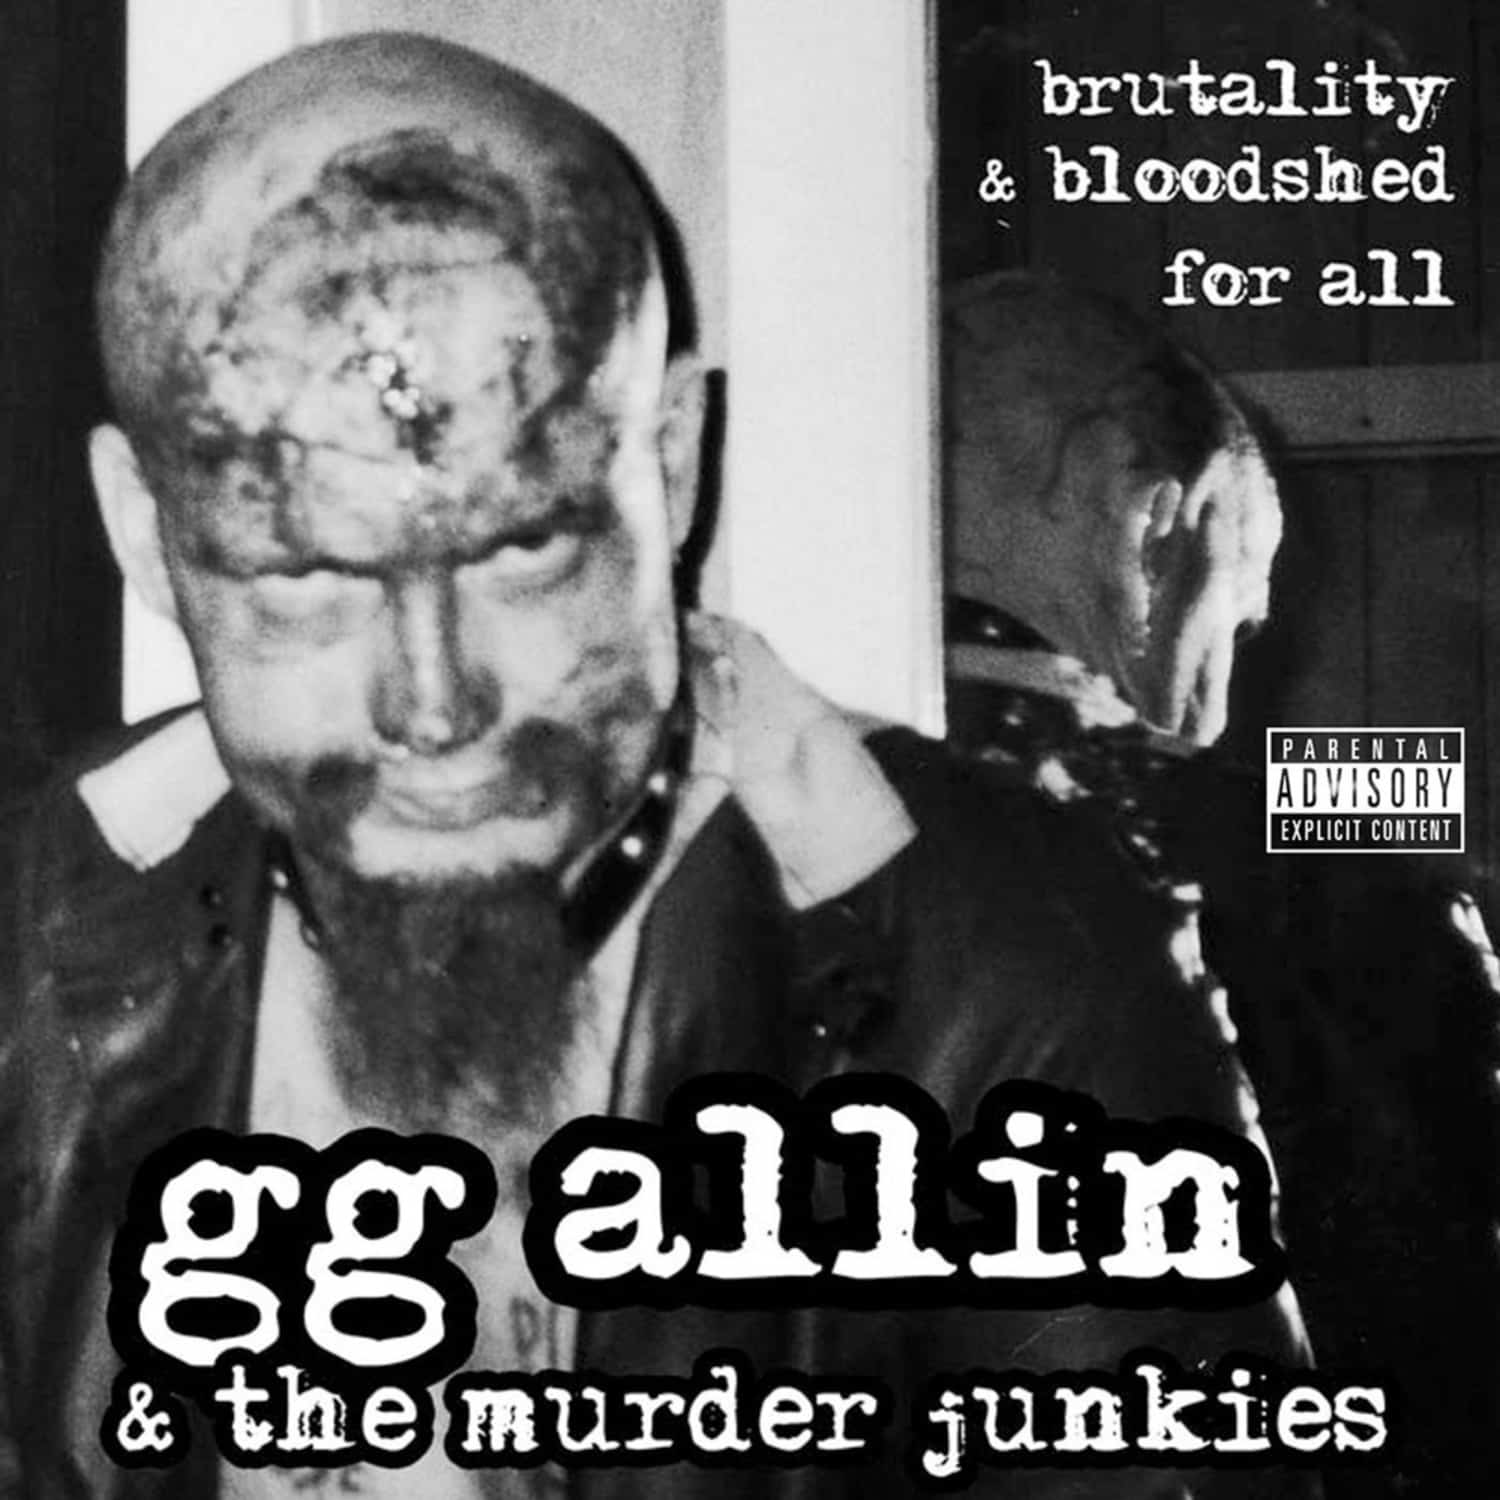 GG Allin & The Murder Junkies - BRUTALITY AND BLOODSHED FOR ALL